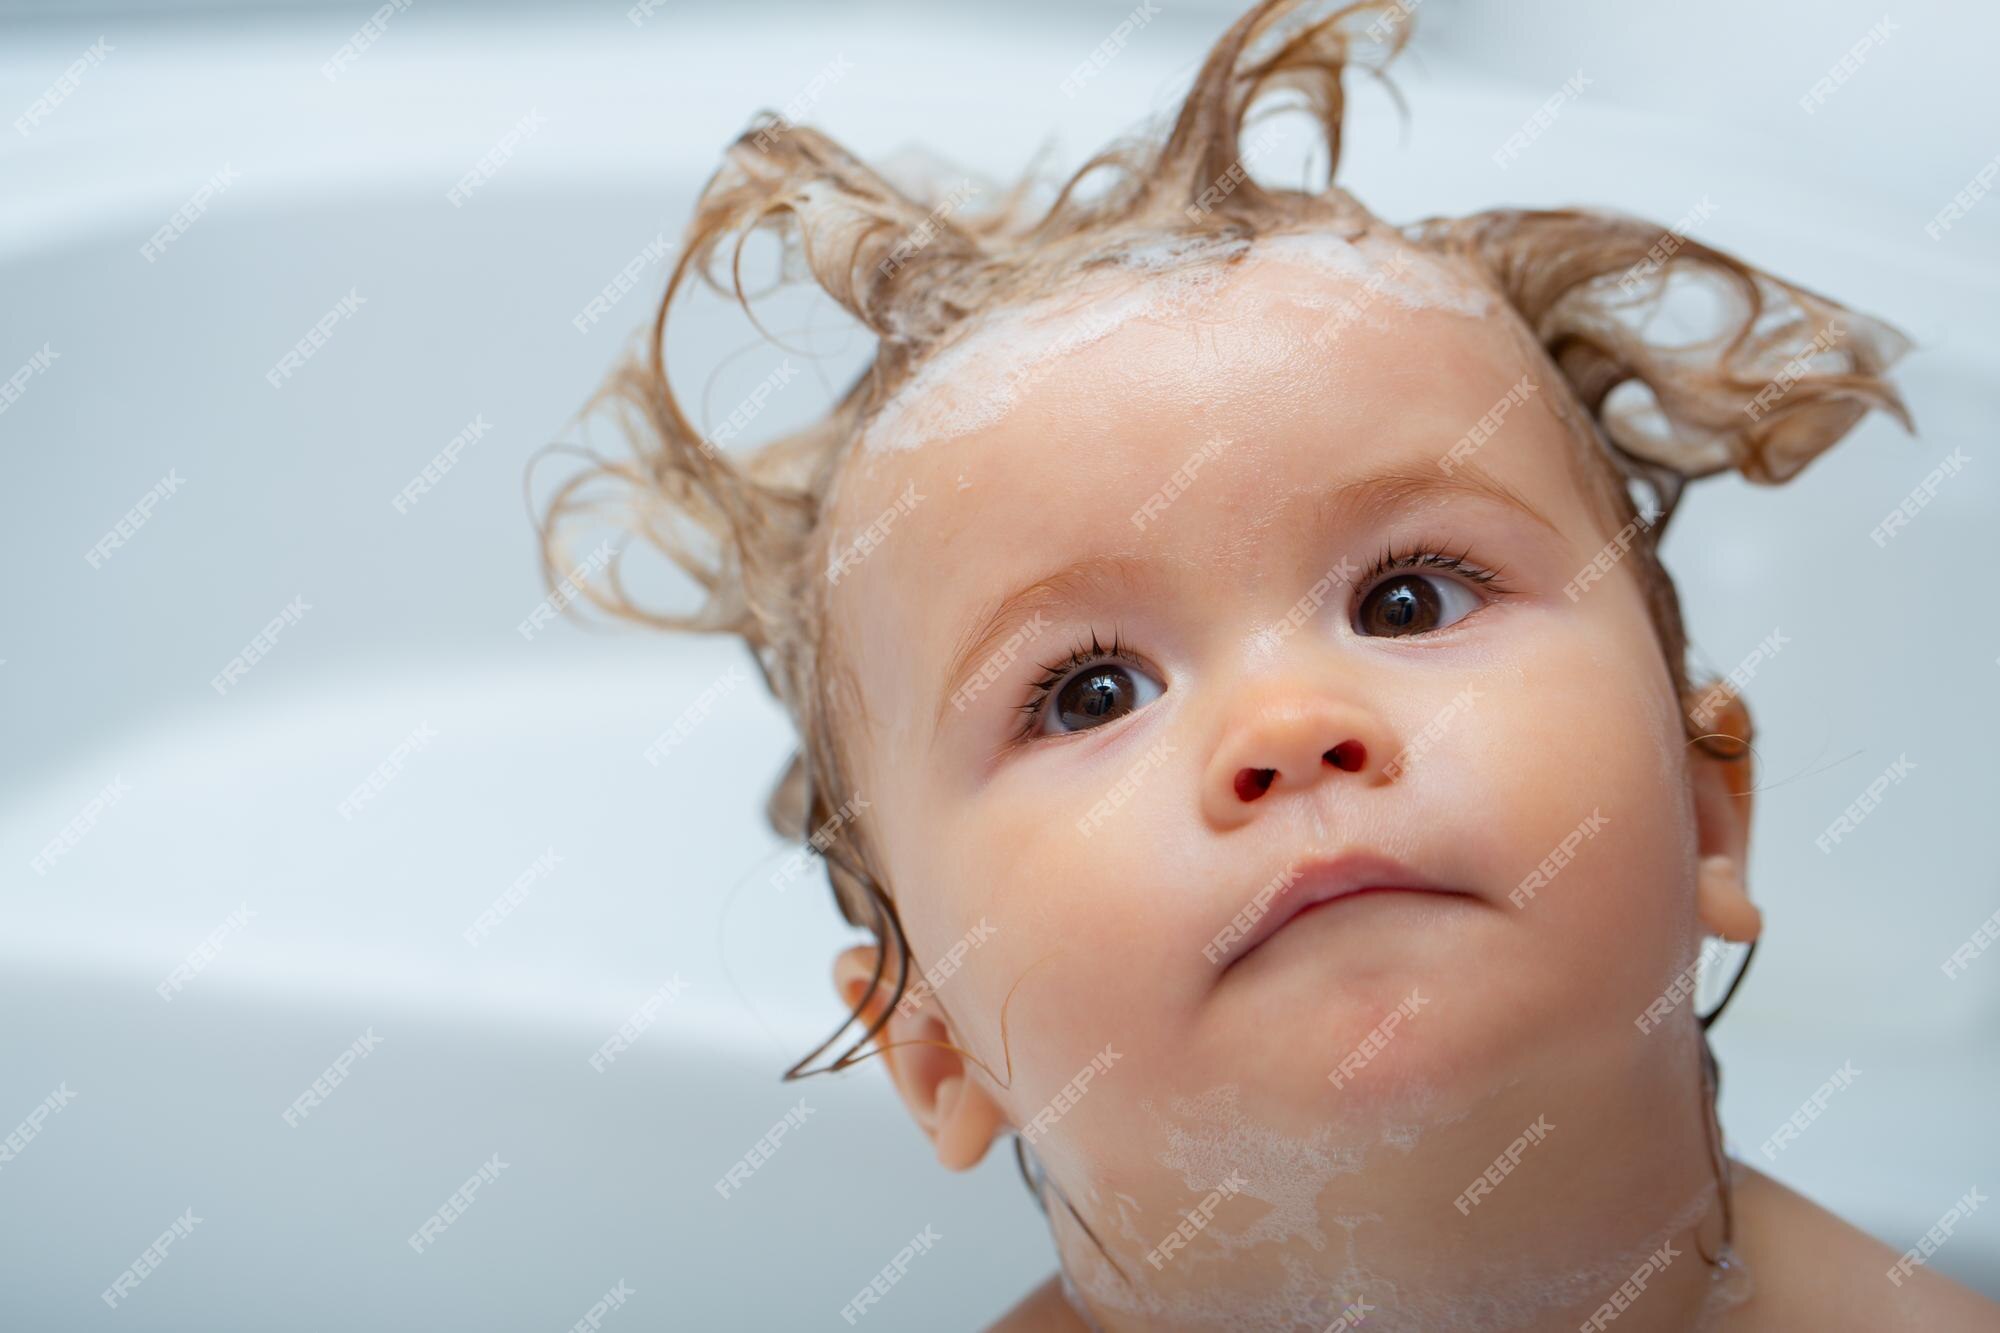 Premium Photo | Little baby child is washing her hair in bath funny kids  face closeup